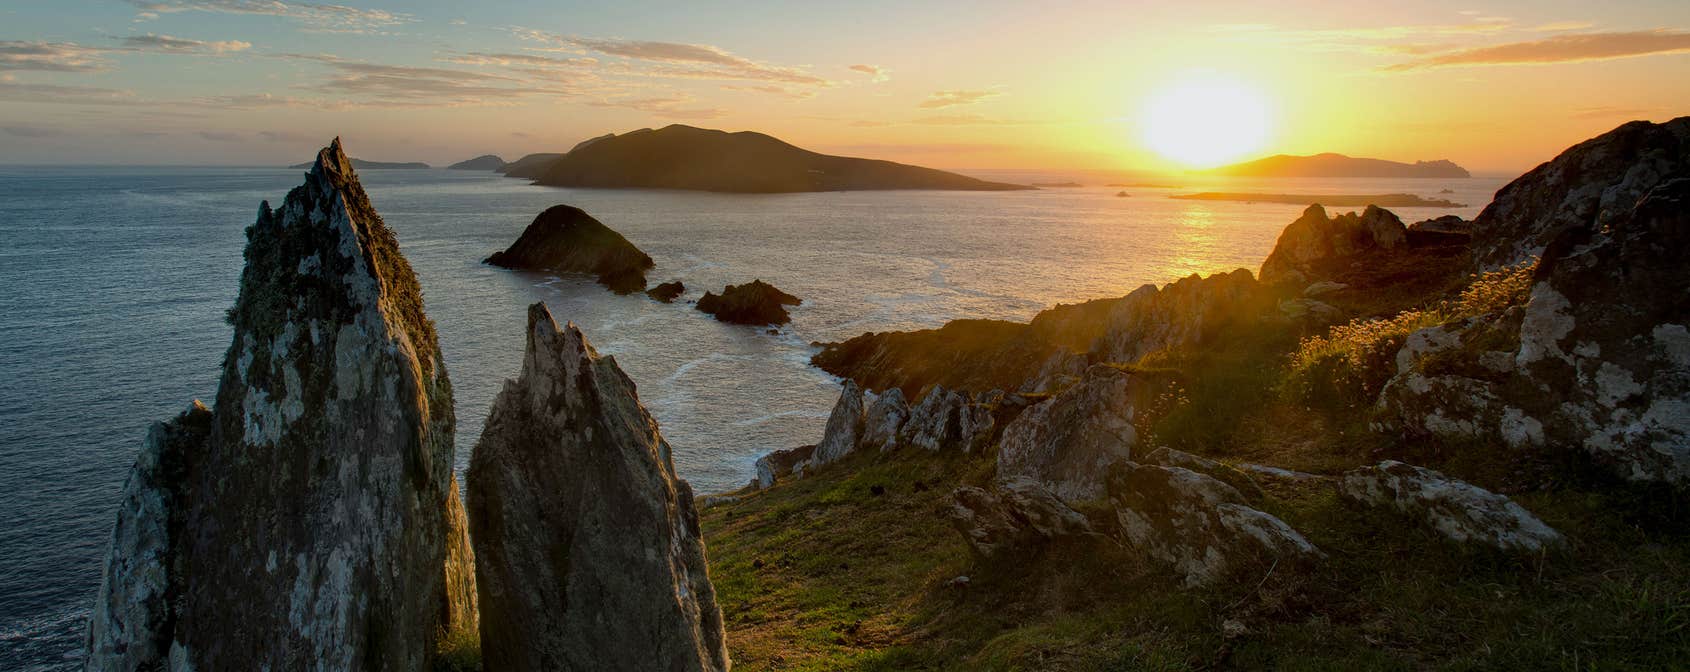 Sunset above the sea and coastline on the Dingle Peninsula, County Kerry